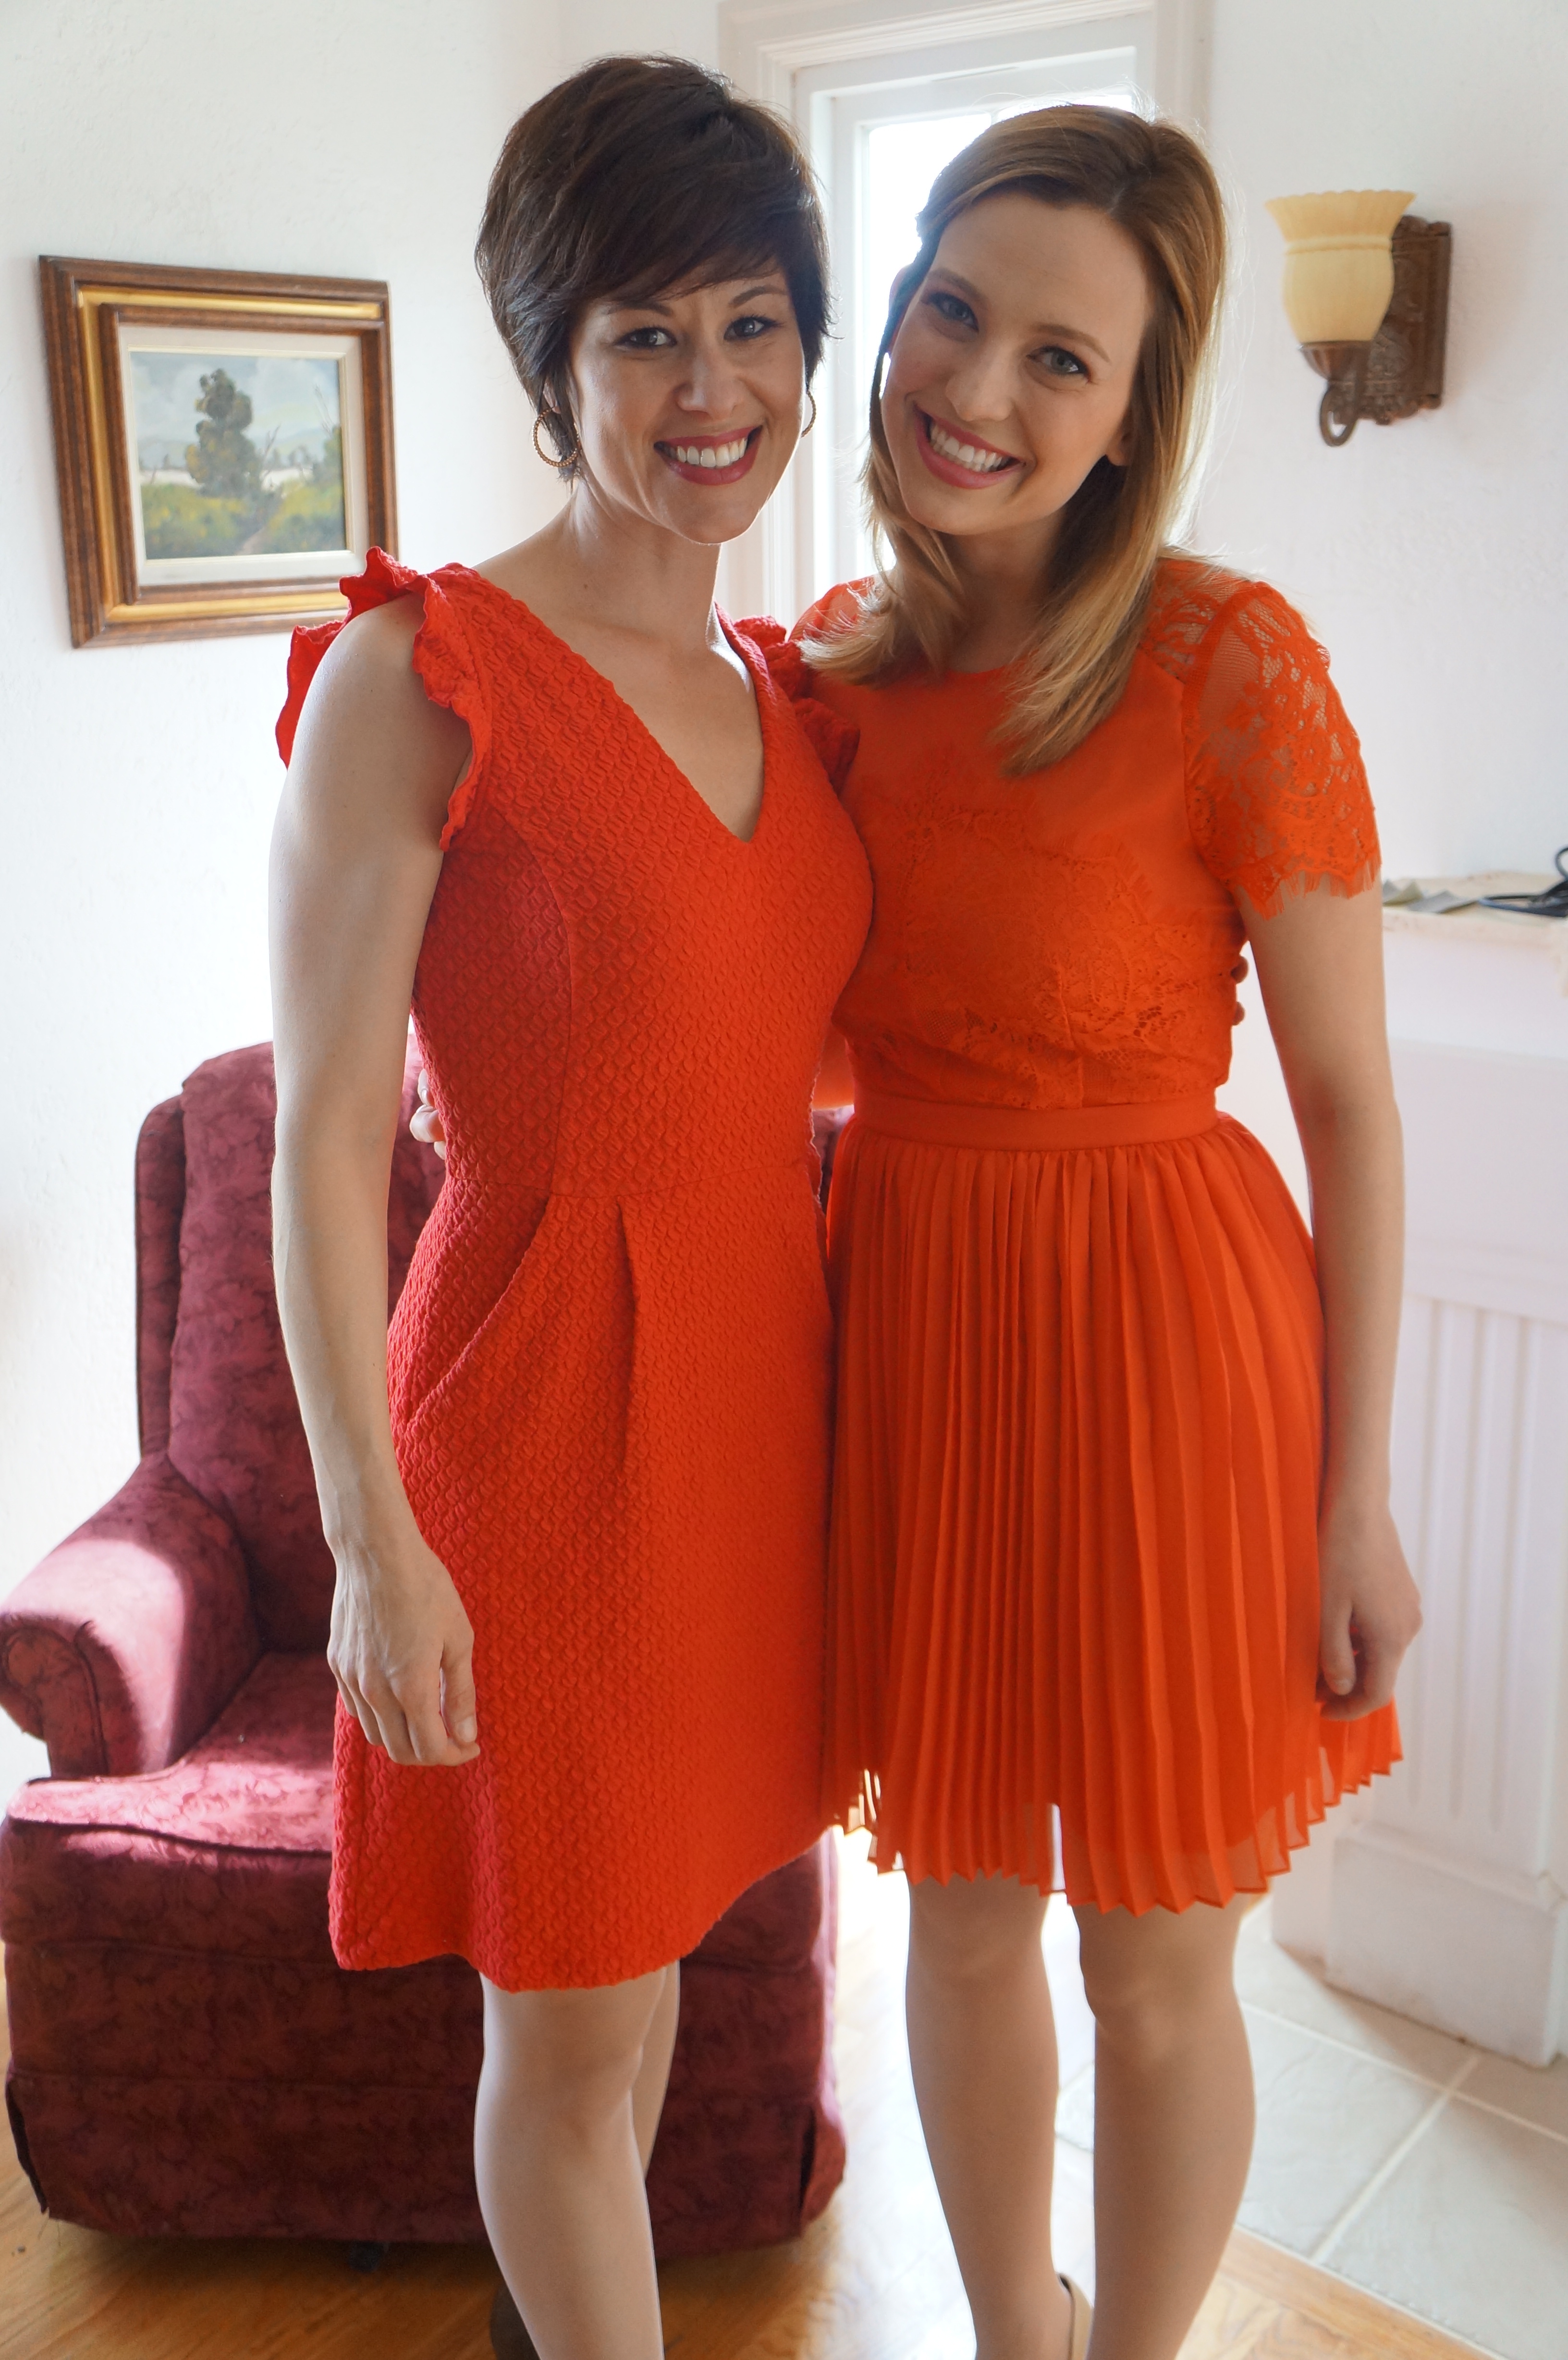 Actress Jensen Higley and Gia Franzia before a charity event for The Writer's Ghost.